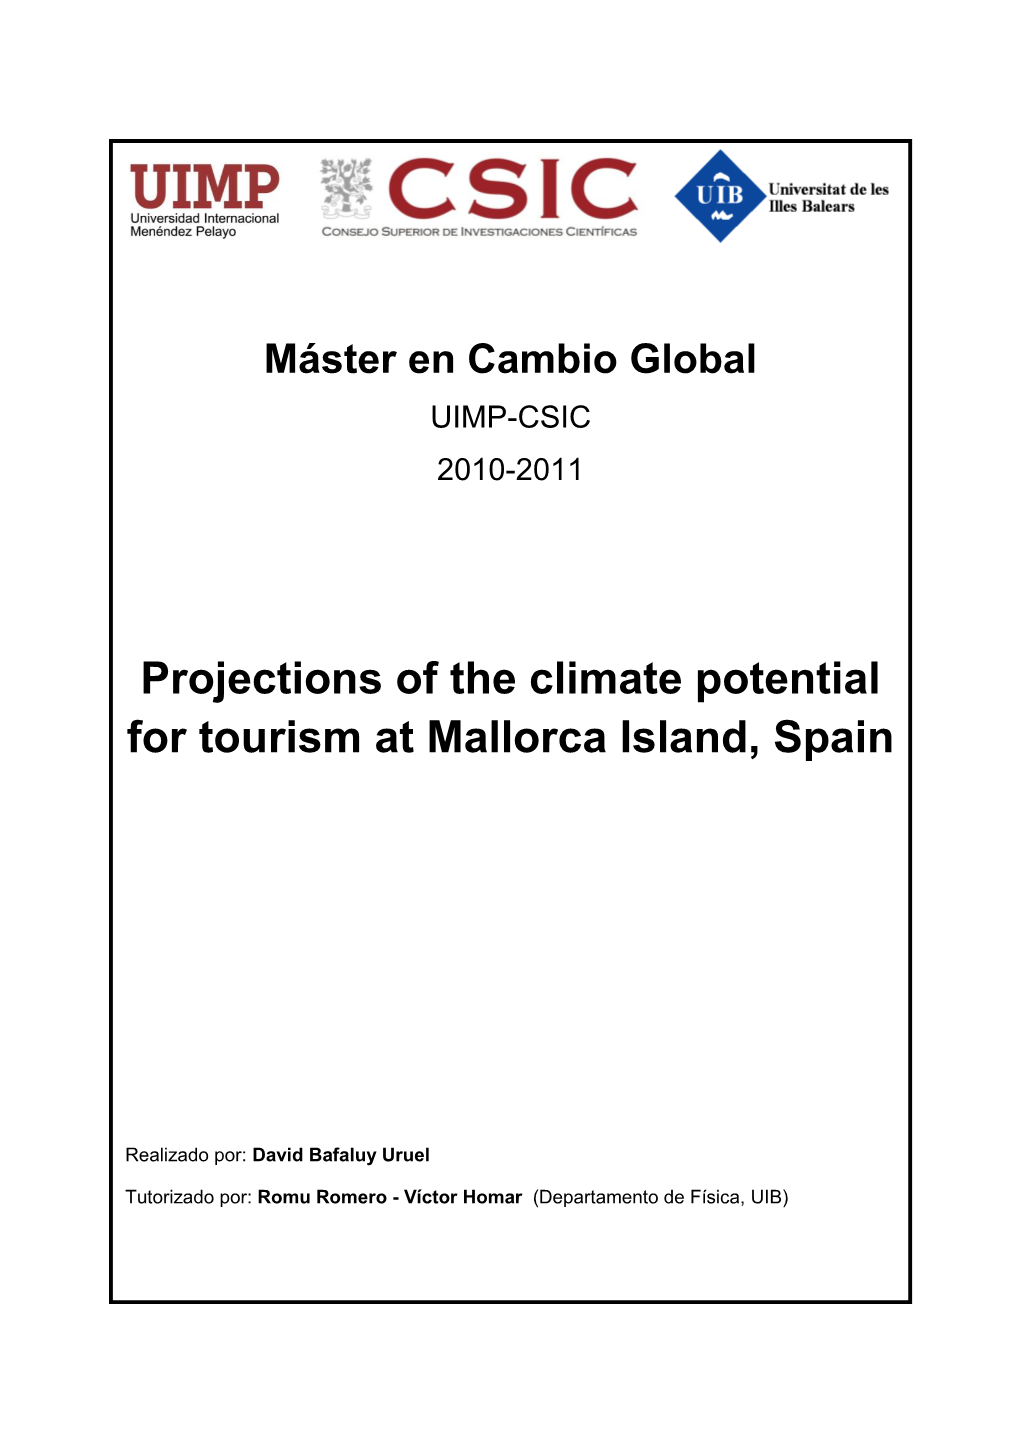 Projections of the Climate Potential for Tourism at Mallorca Island, Spain